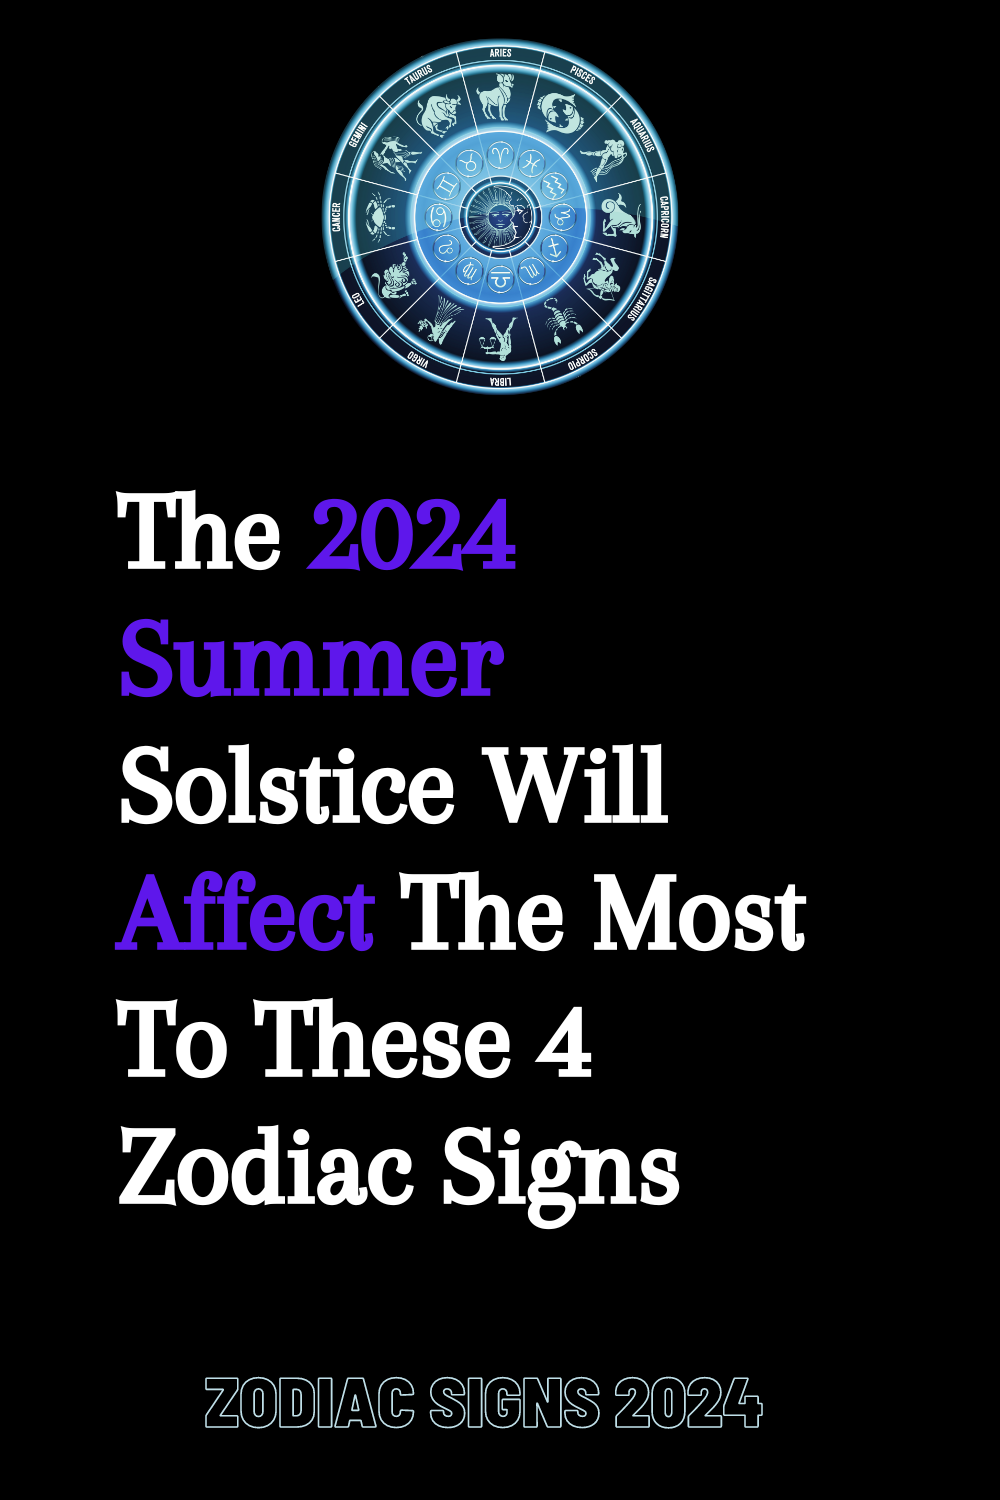 The 2024 Summer Solstice Will Affect The Most To These 4 Zodiac Signs